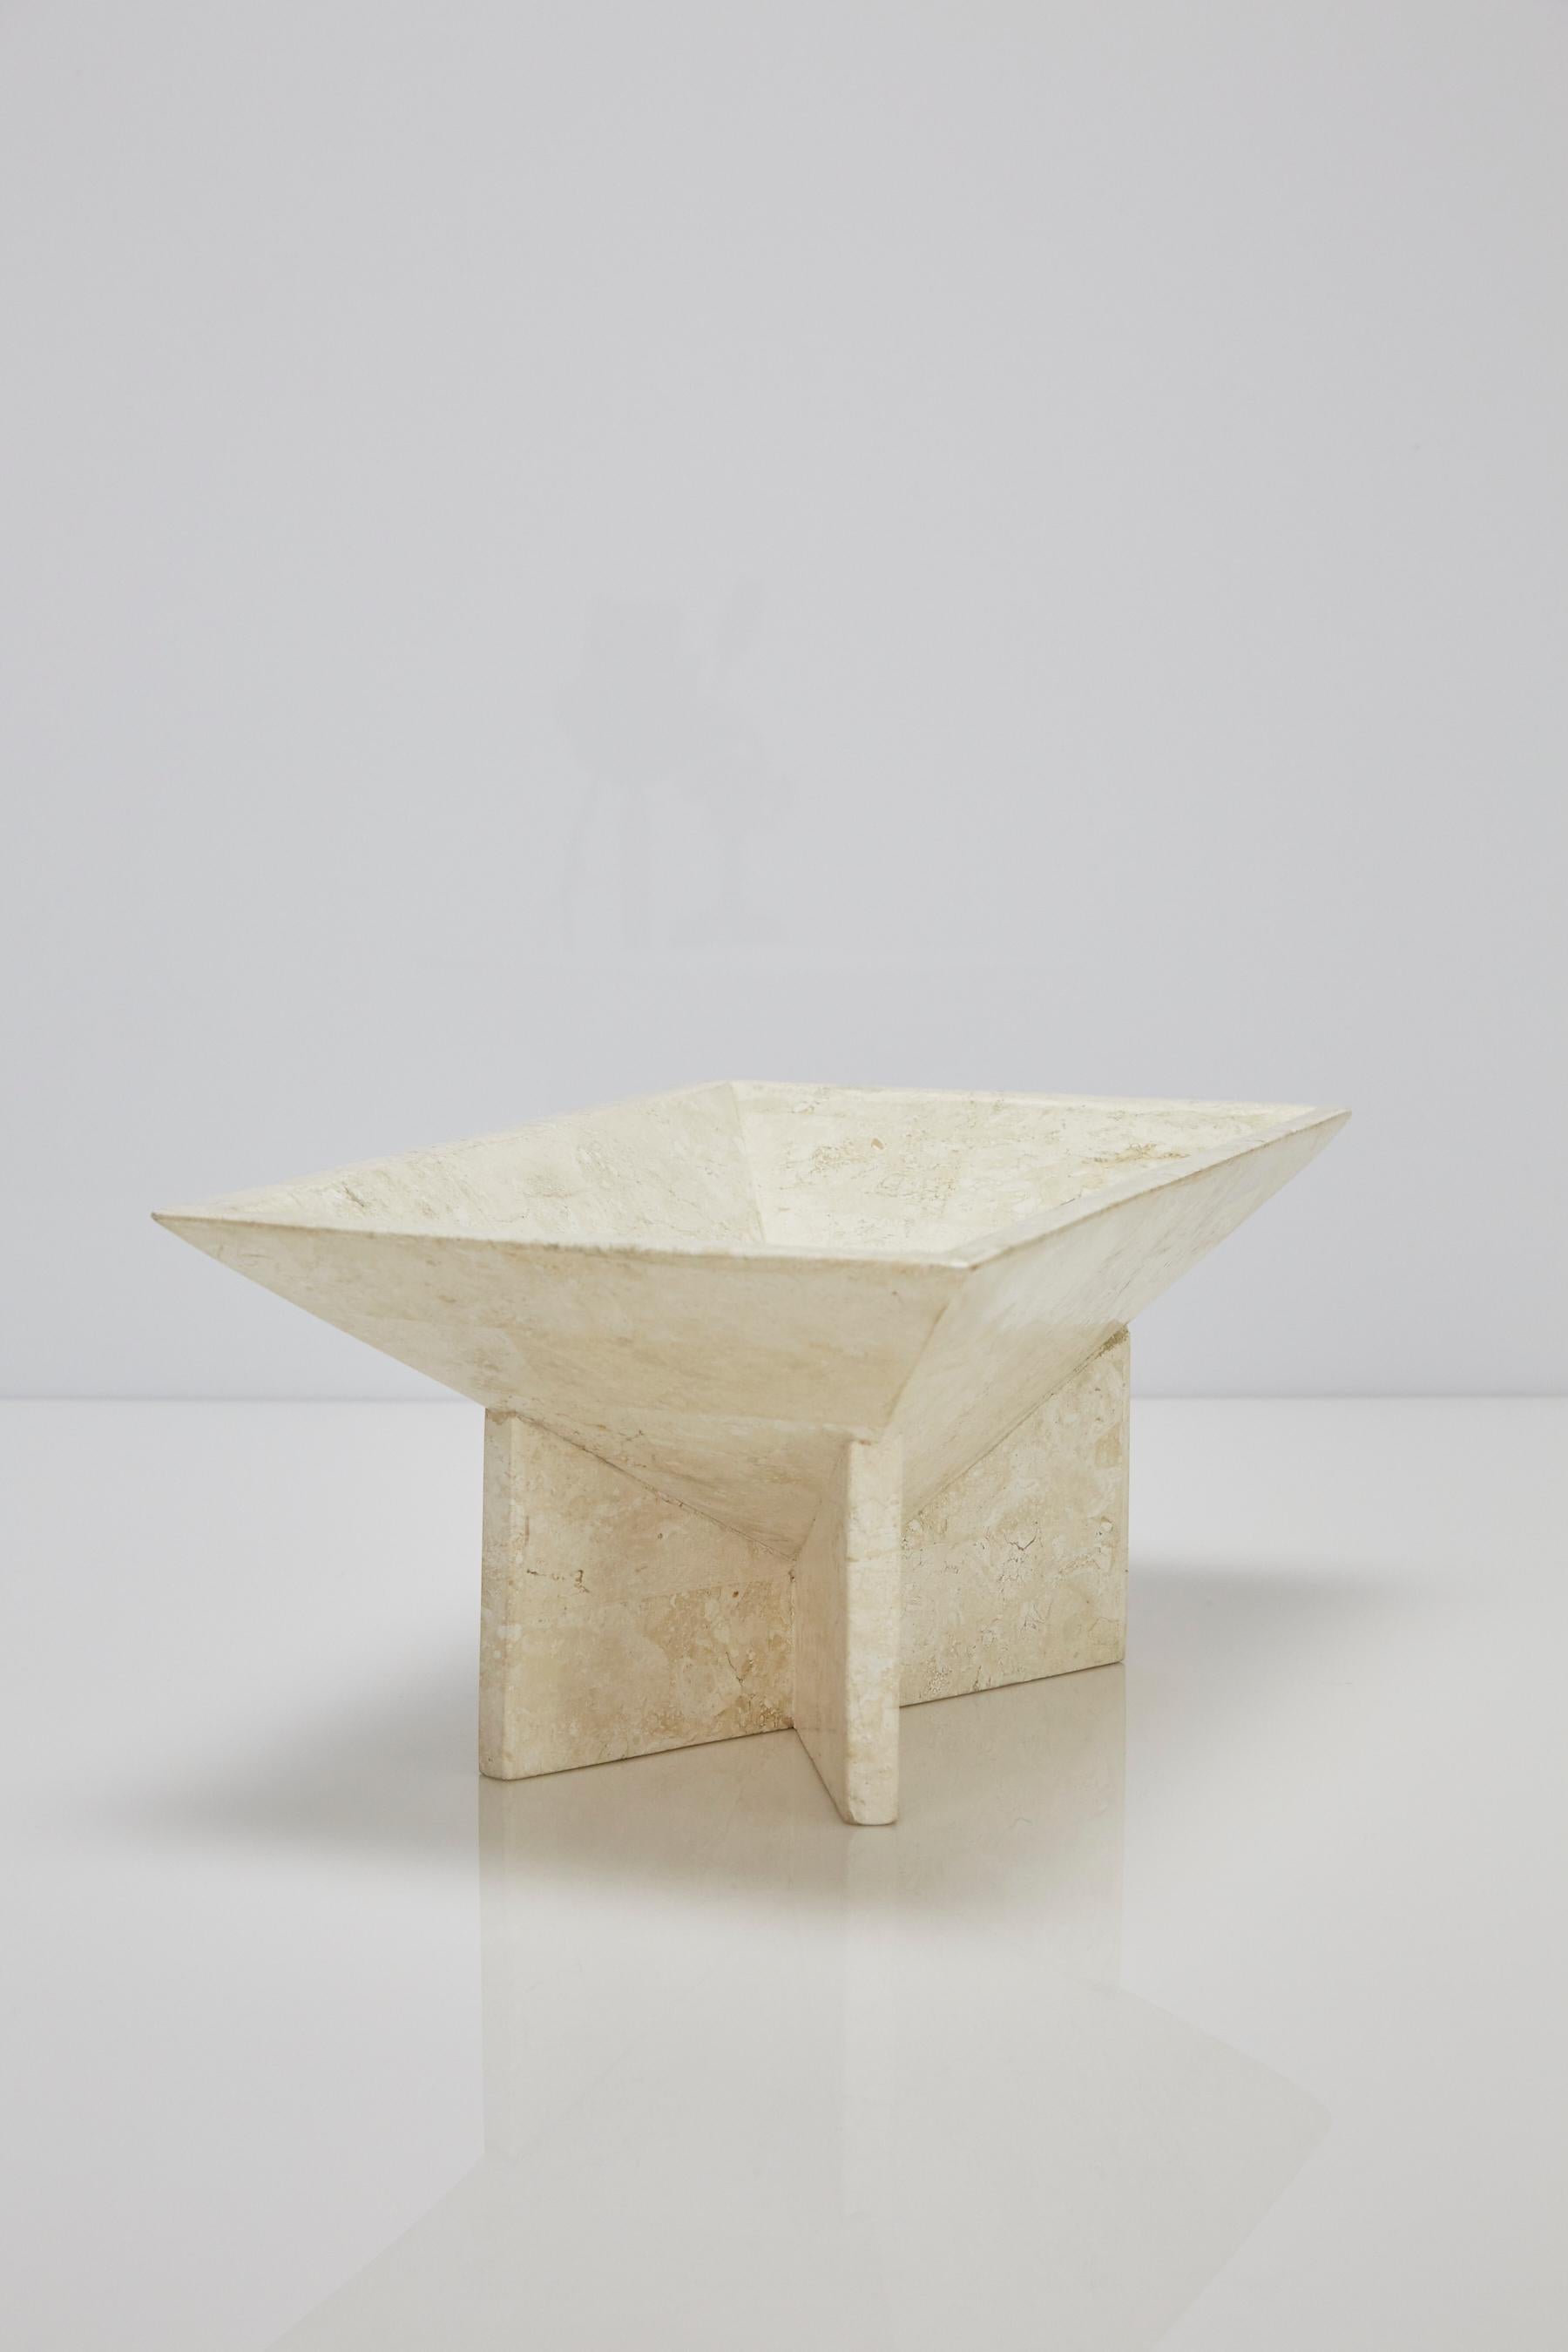 Post-Modern Rectangular Tessellated Stone Bowl on Elevated Base, 1990s For Sale